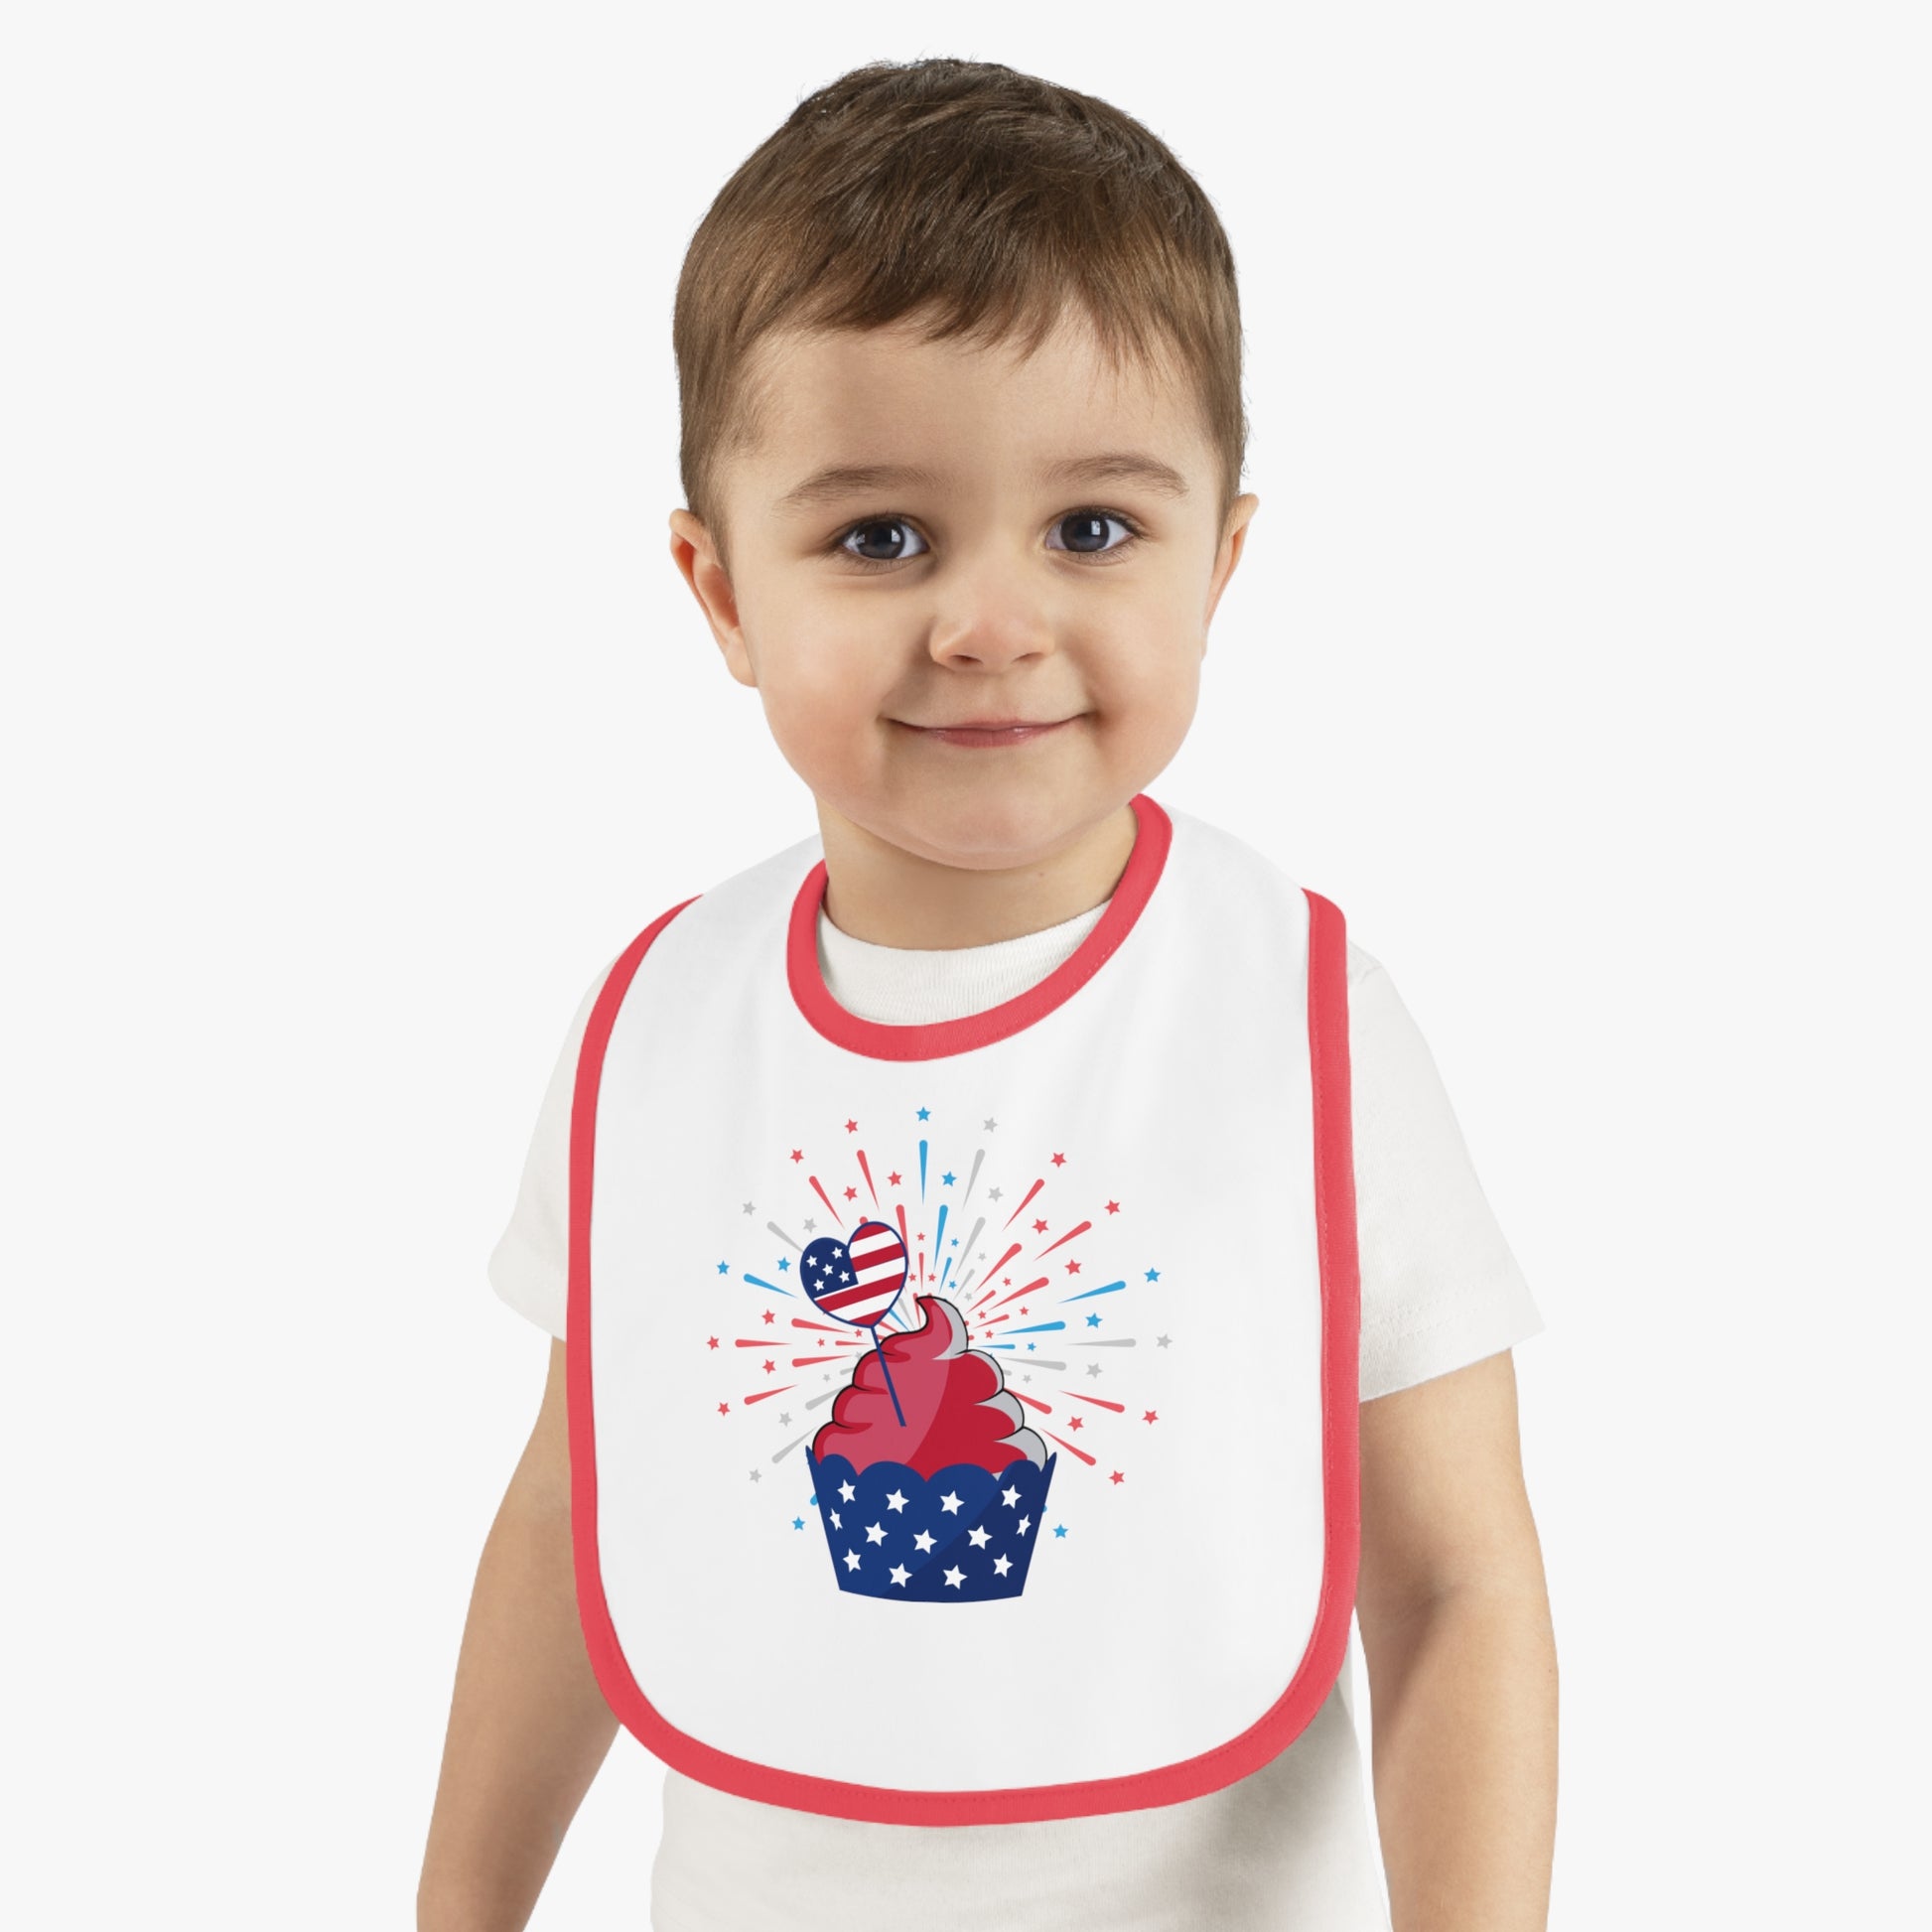 Mock up of the child wearing the bib with the red trim